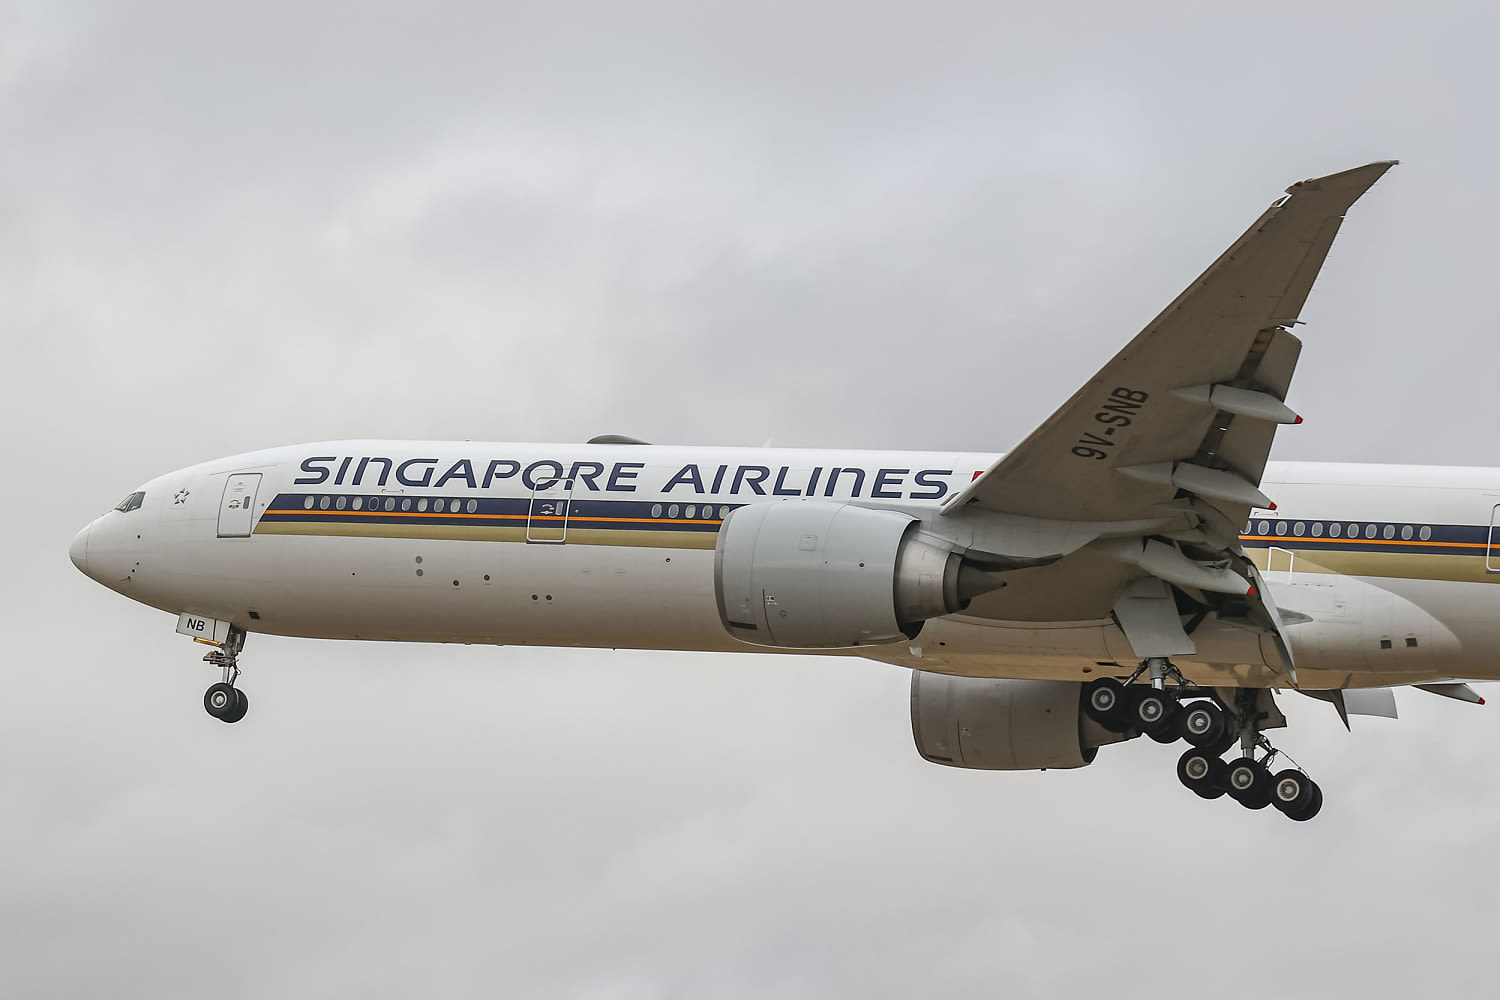 1 dead, multiple injured after Singapore Airlines flight encounters 'severe turbulence'